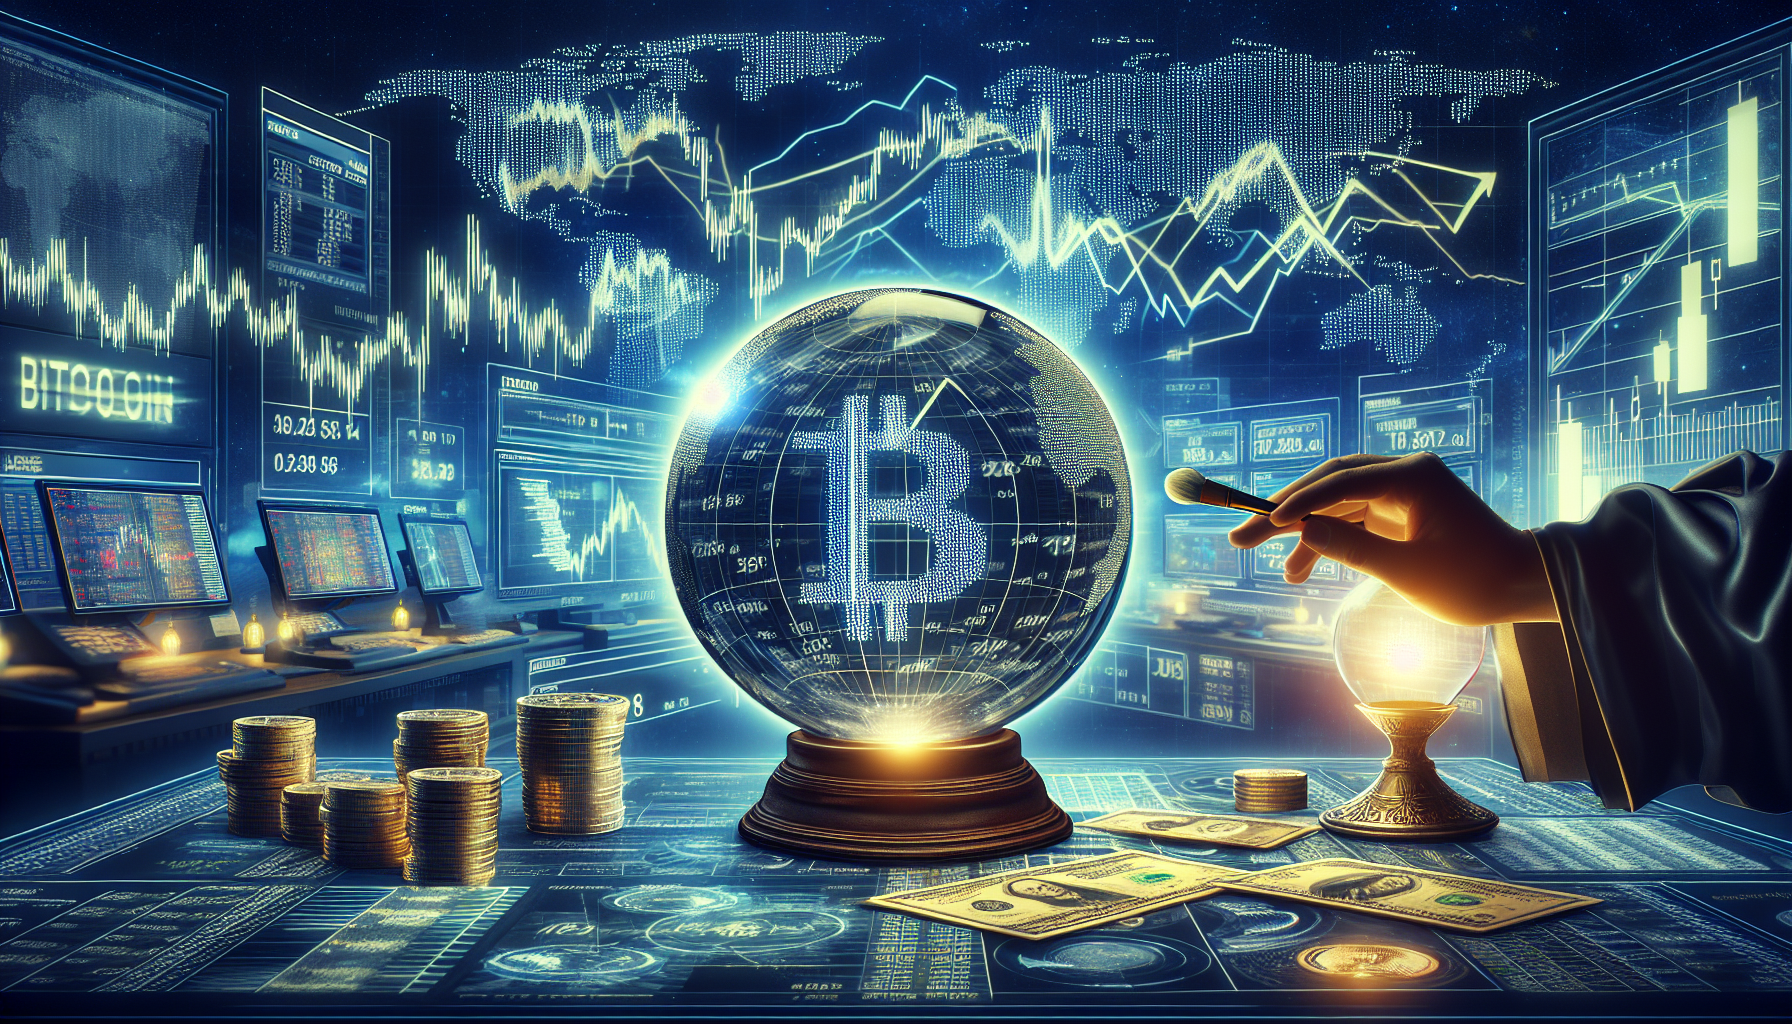 Bitcoin price recovers: an insight into market volatility and future predictions